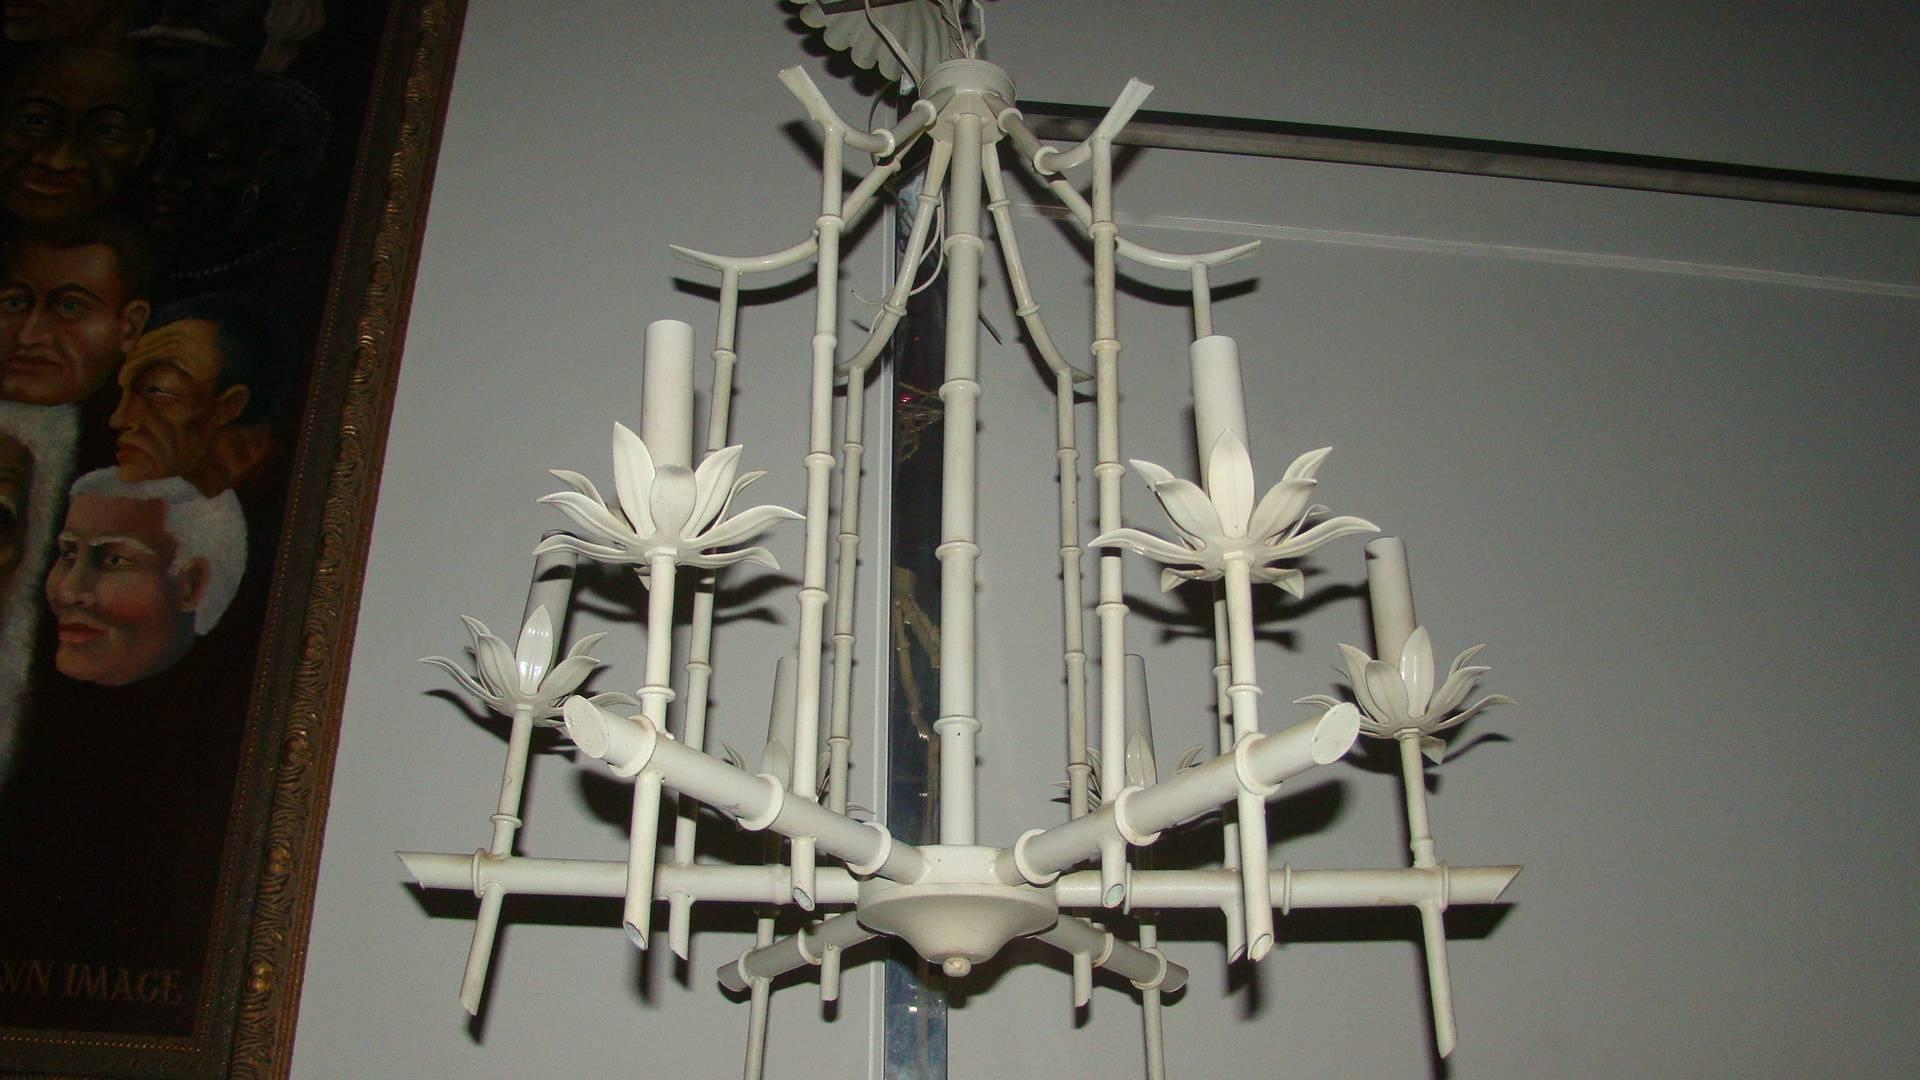 Exceptional hanging faux bamboo Italian chandelier. This beautiful lamp is comprised of six lights in the faux bamboo chinoiserie metal design. The paint is the original off-white color. Retains ceiling cap and chain which adds 18